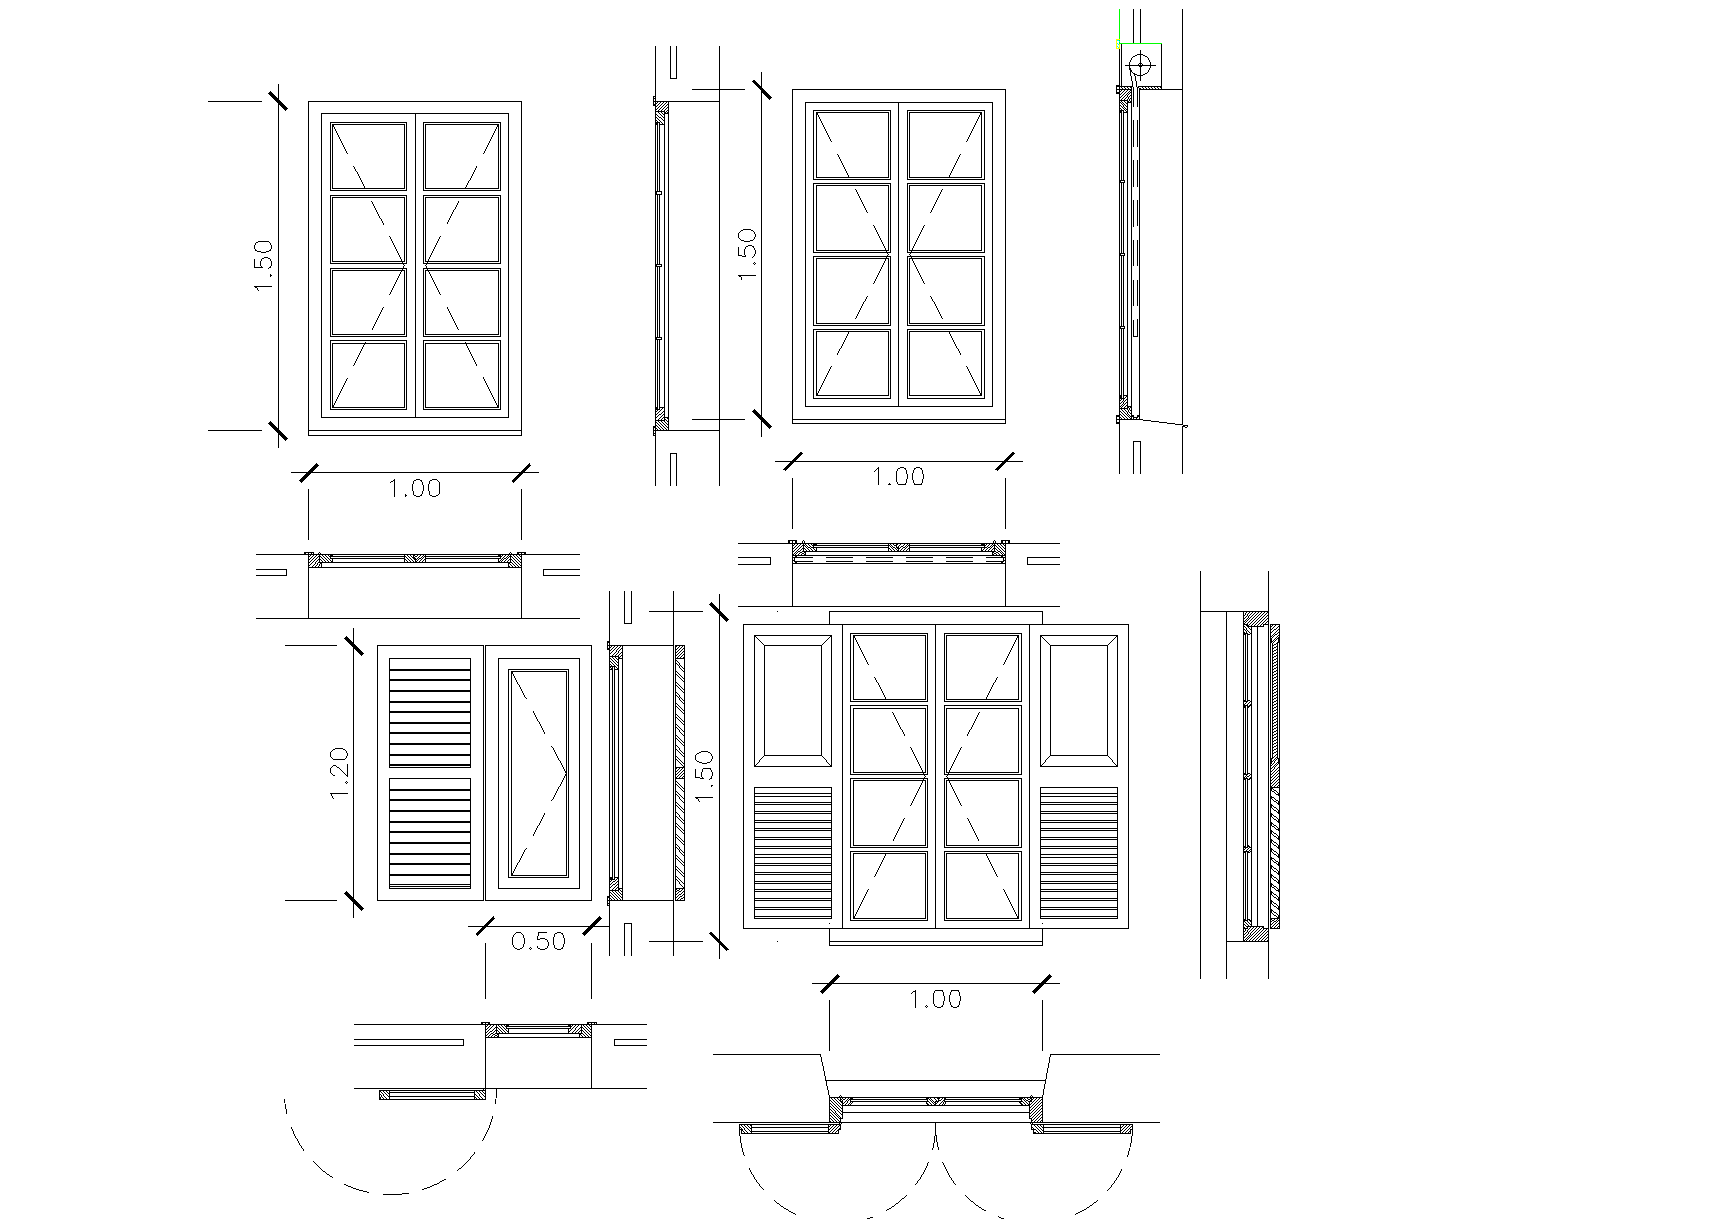 Sections of window plan detail dwg file. Cadbull